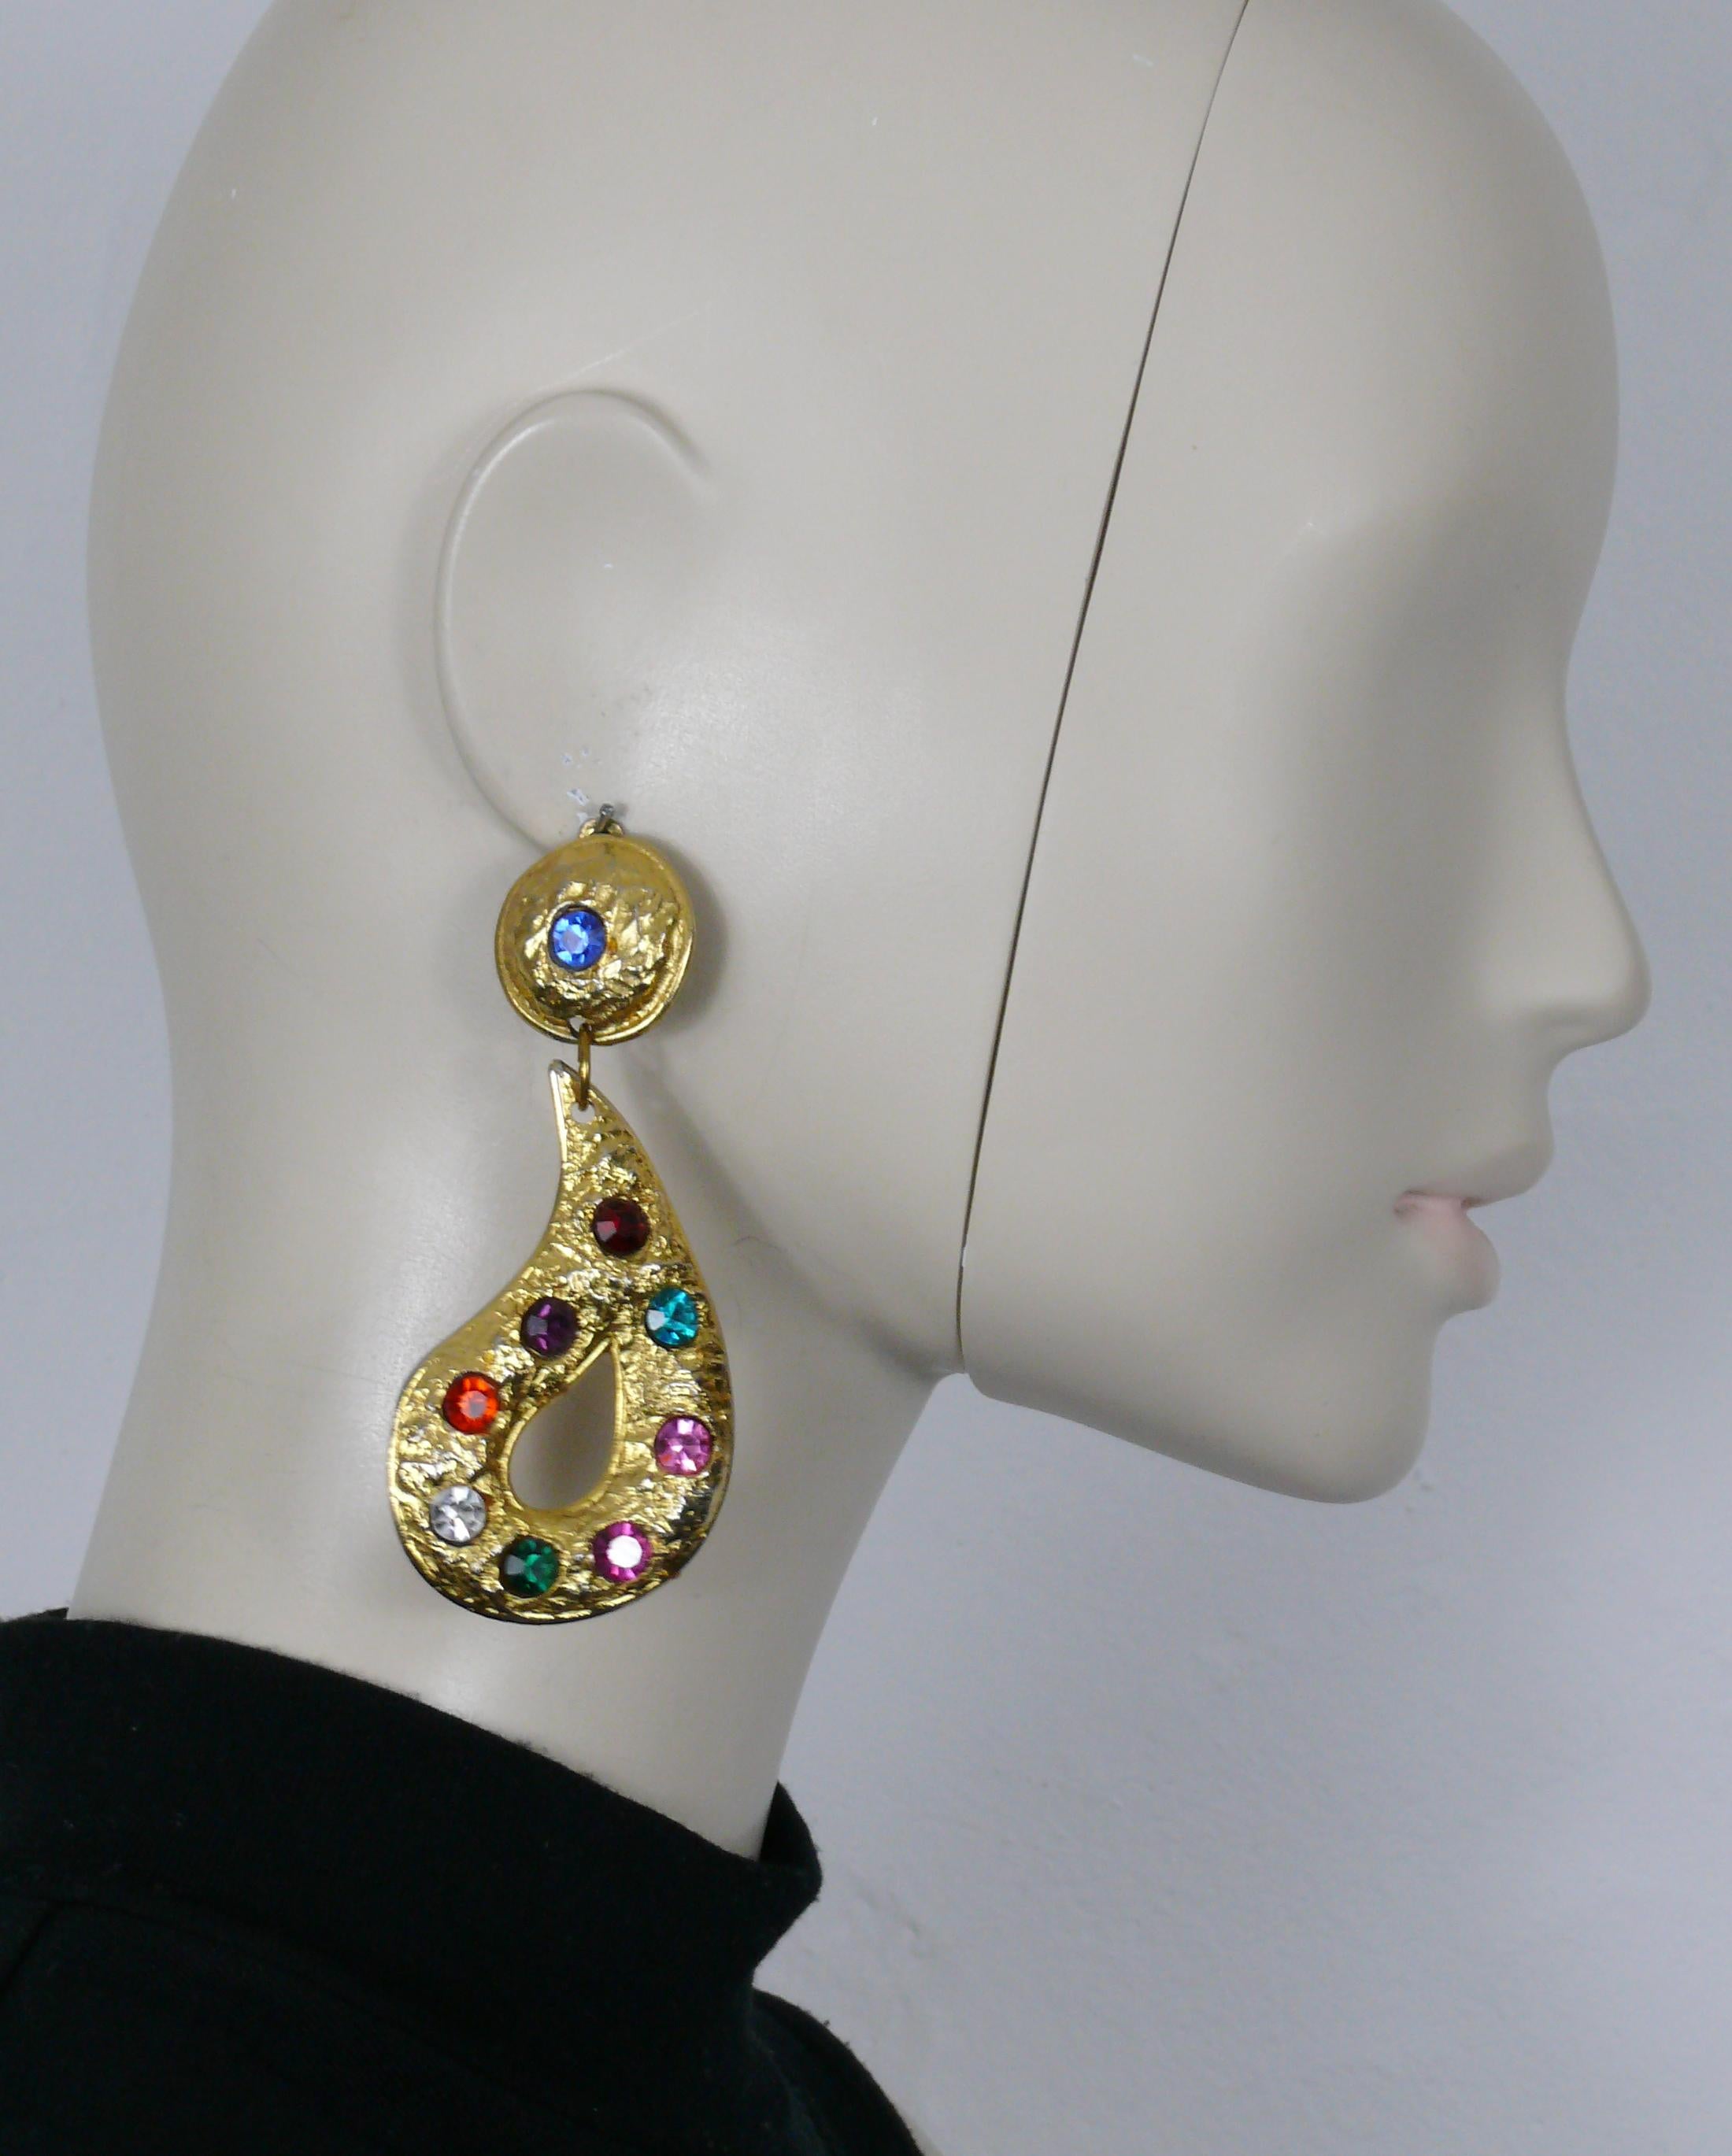 EDOUARD RAMBAUD vintage massive textured gold tone dangling earrings (clip-on) embellished with multicolor crystals.

Embossed EDOUARD RAMBAUD Paris.

Indicative measurements : max. height approx. 9.2 cm (3.62 inches) / max width approx. 4 cm (1.57